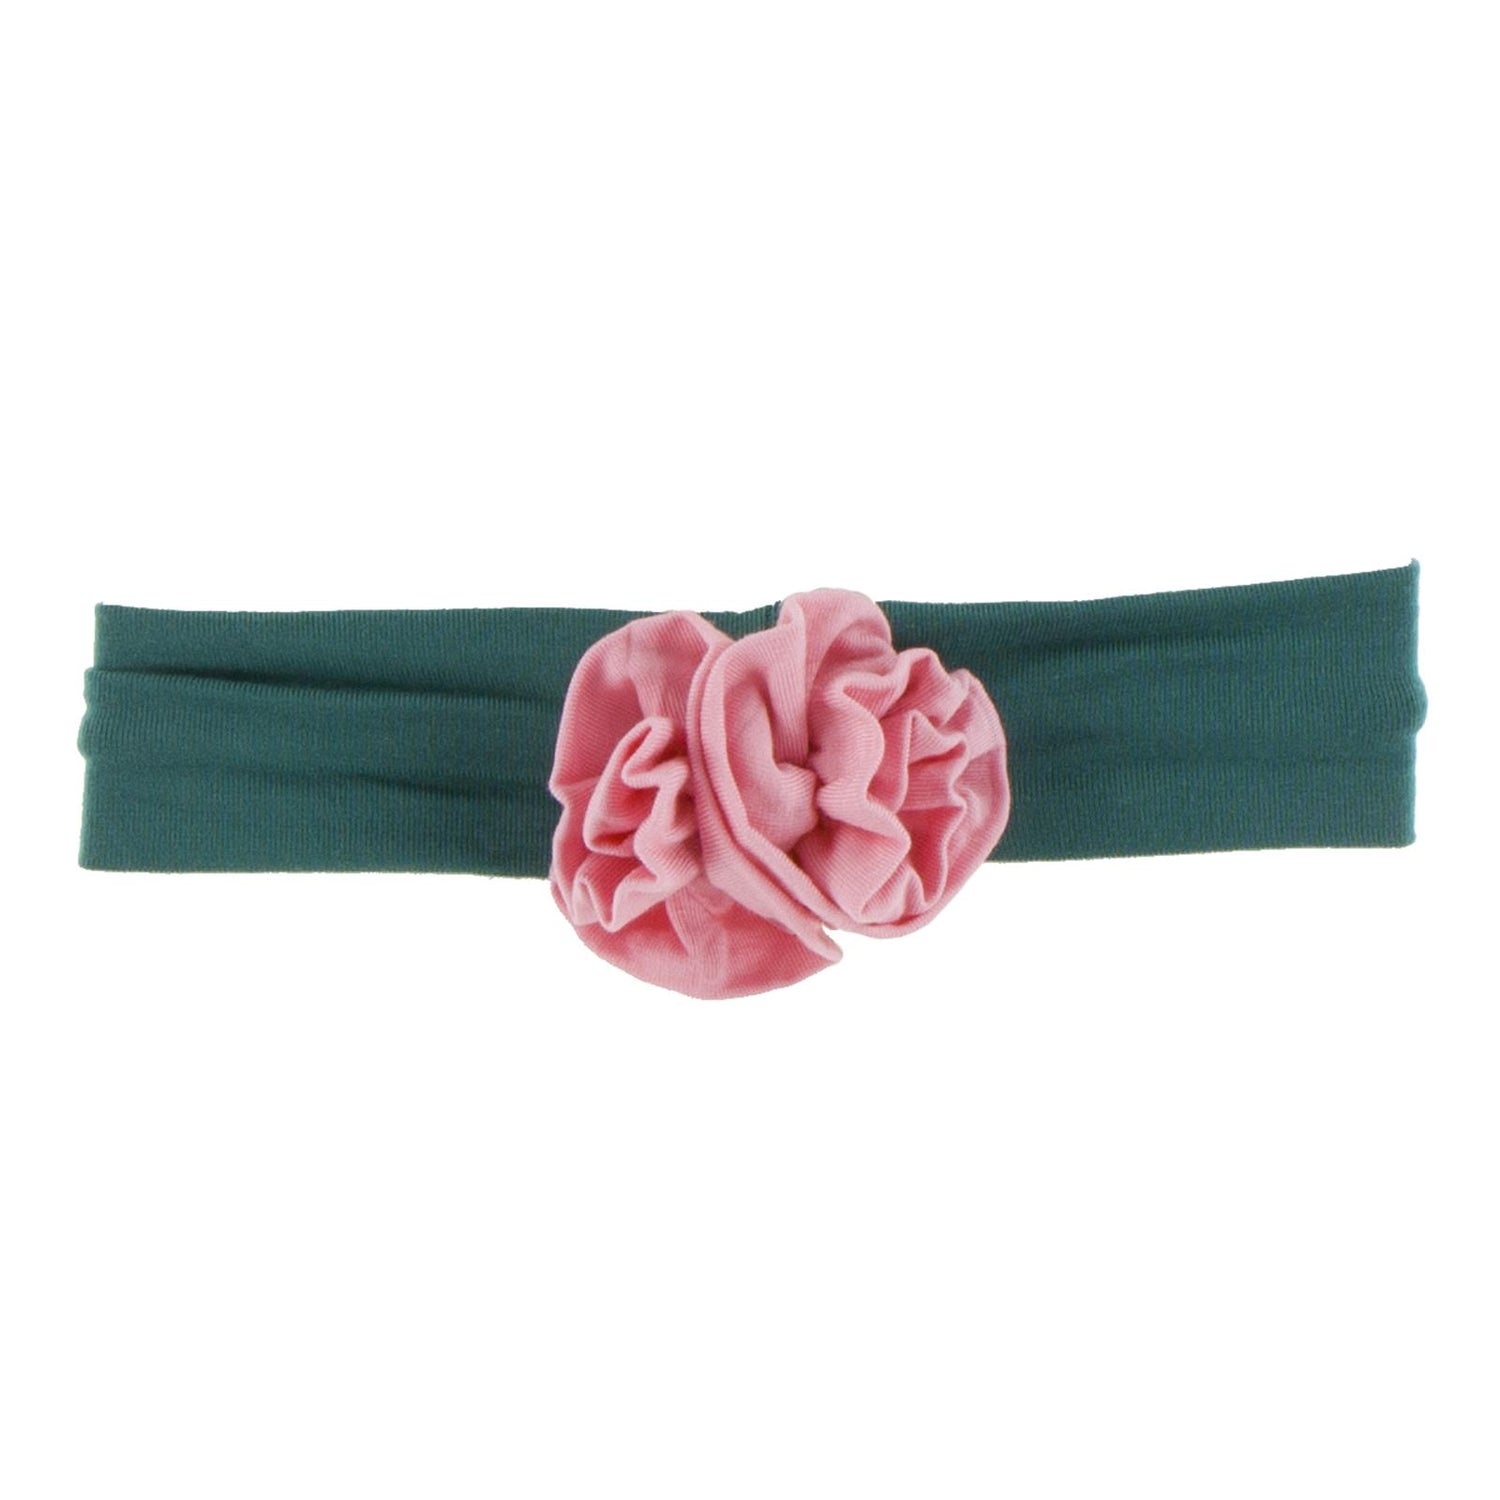 Flower Headband in Ivy with Lotus